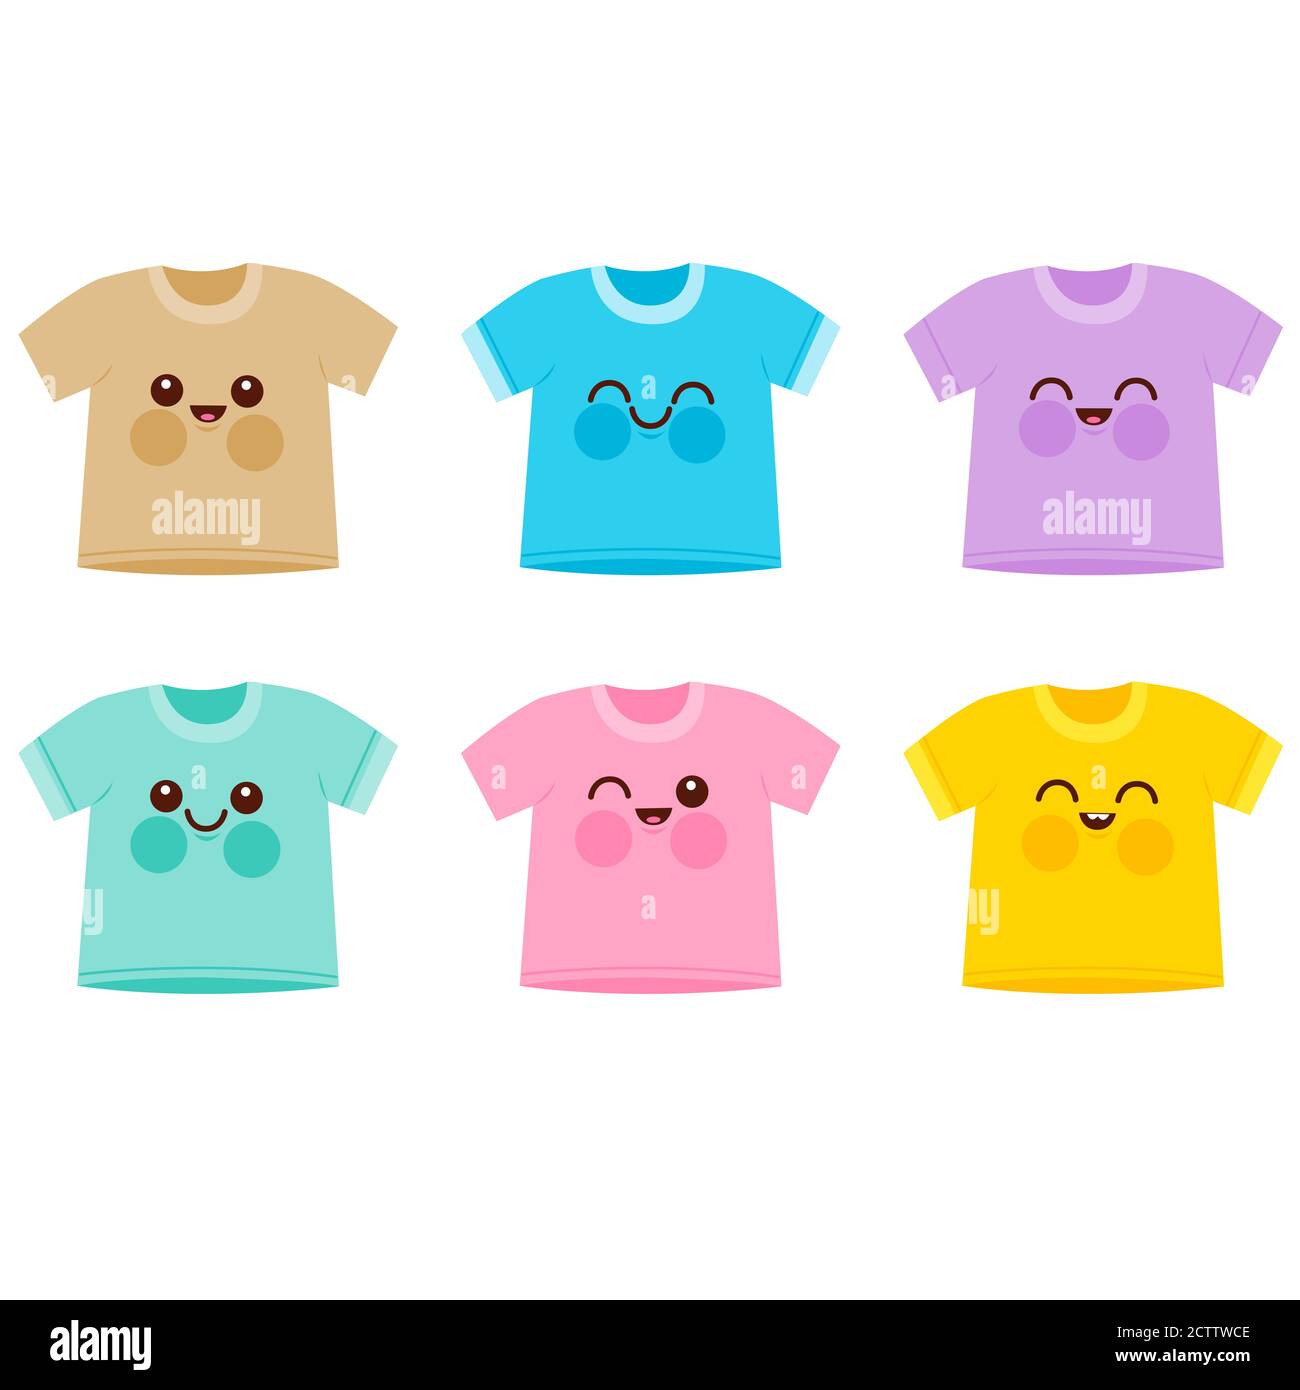 Colorful t-shirt character collection. Stock Photo